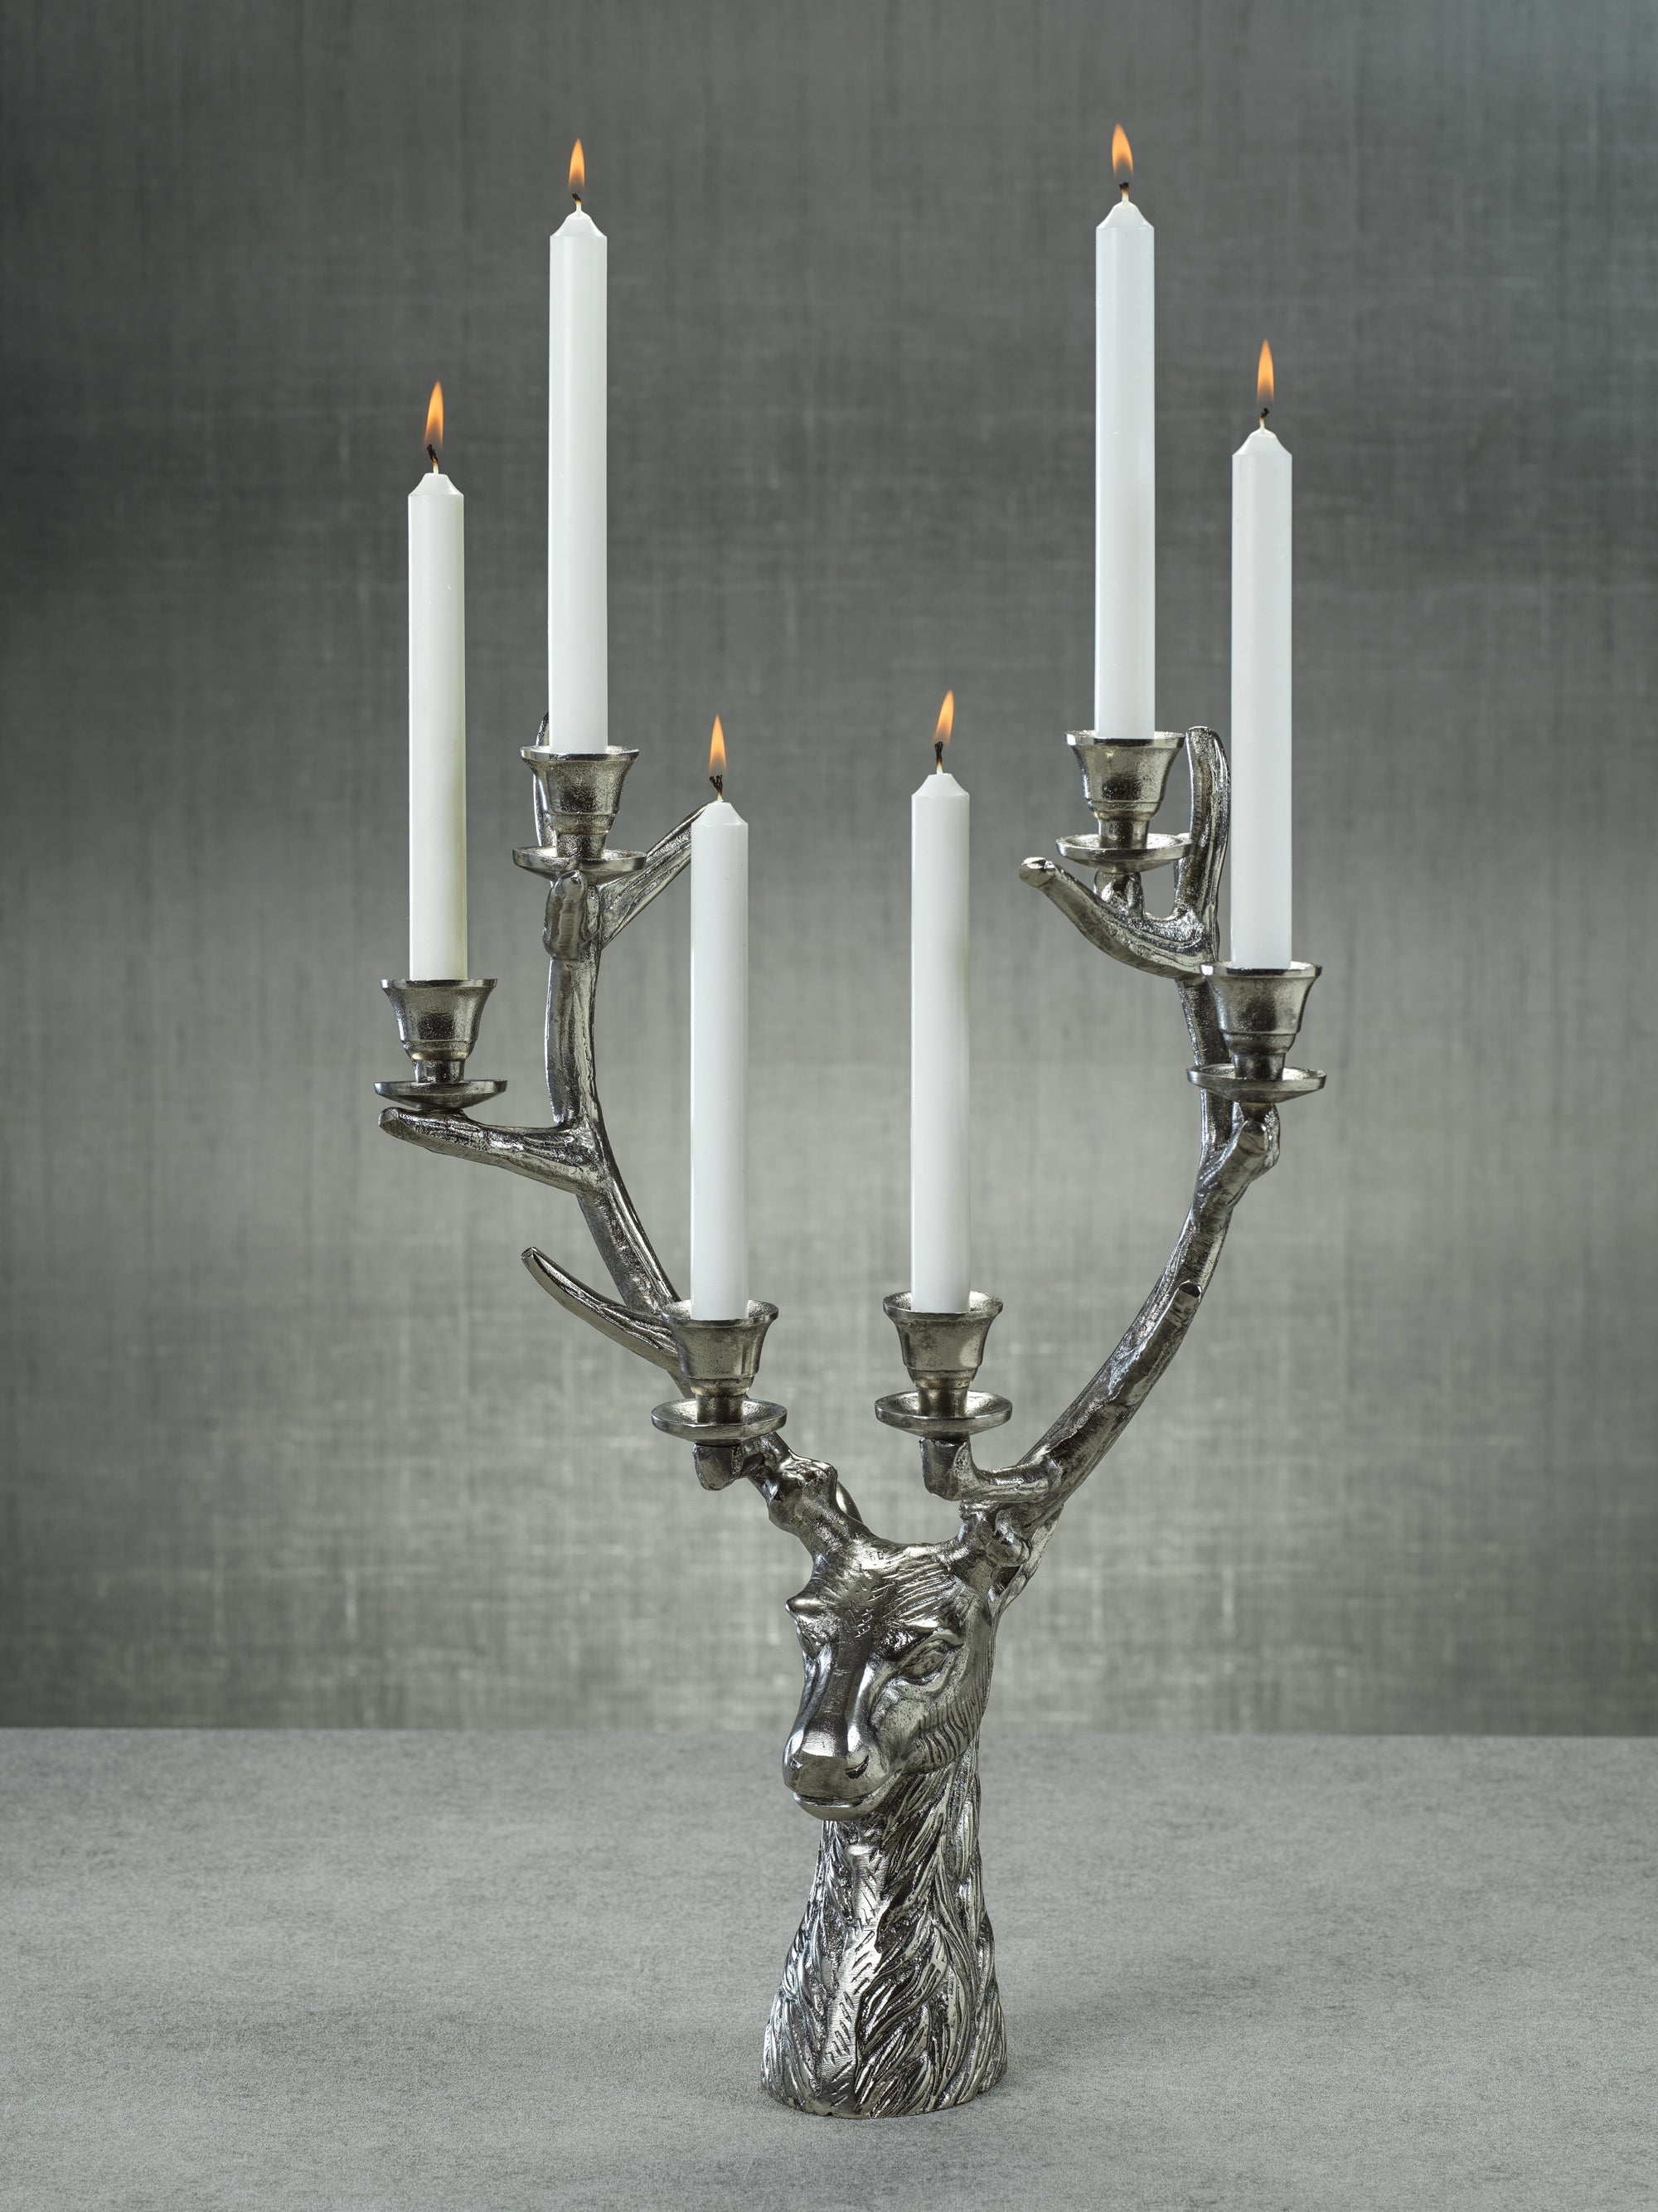 Stag Head 6 Tier Candleholder - Silver Antique - 2 Sizes - CARLYLE AVENUE